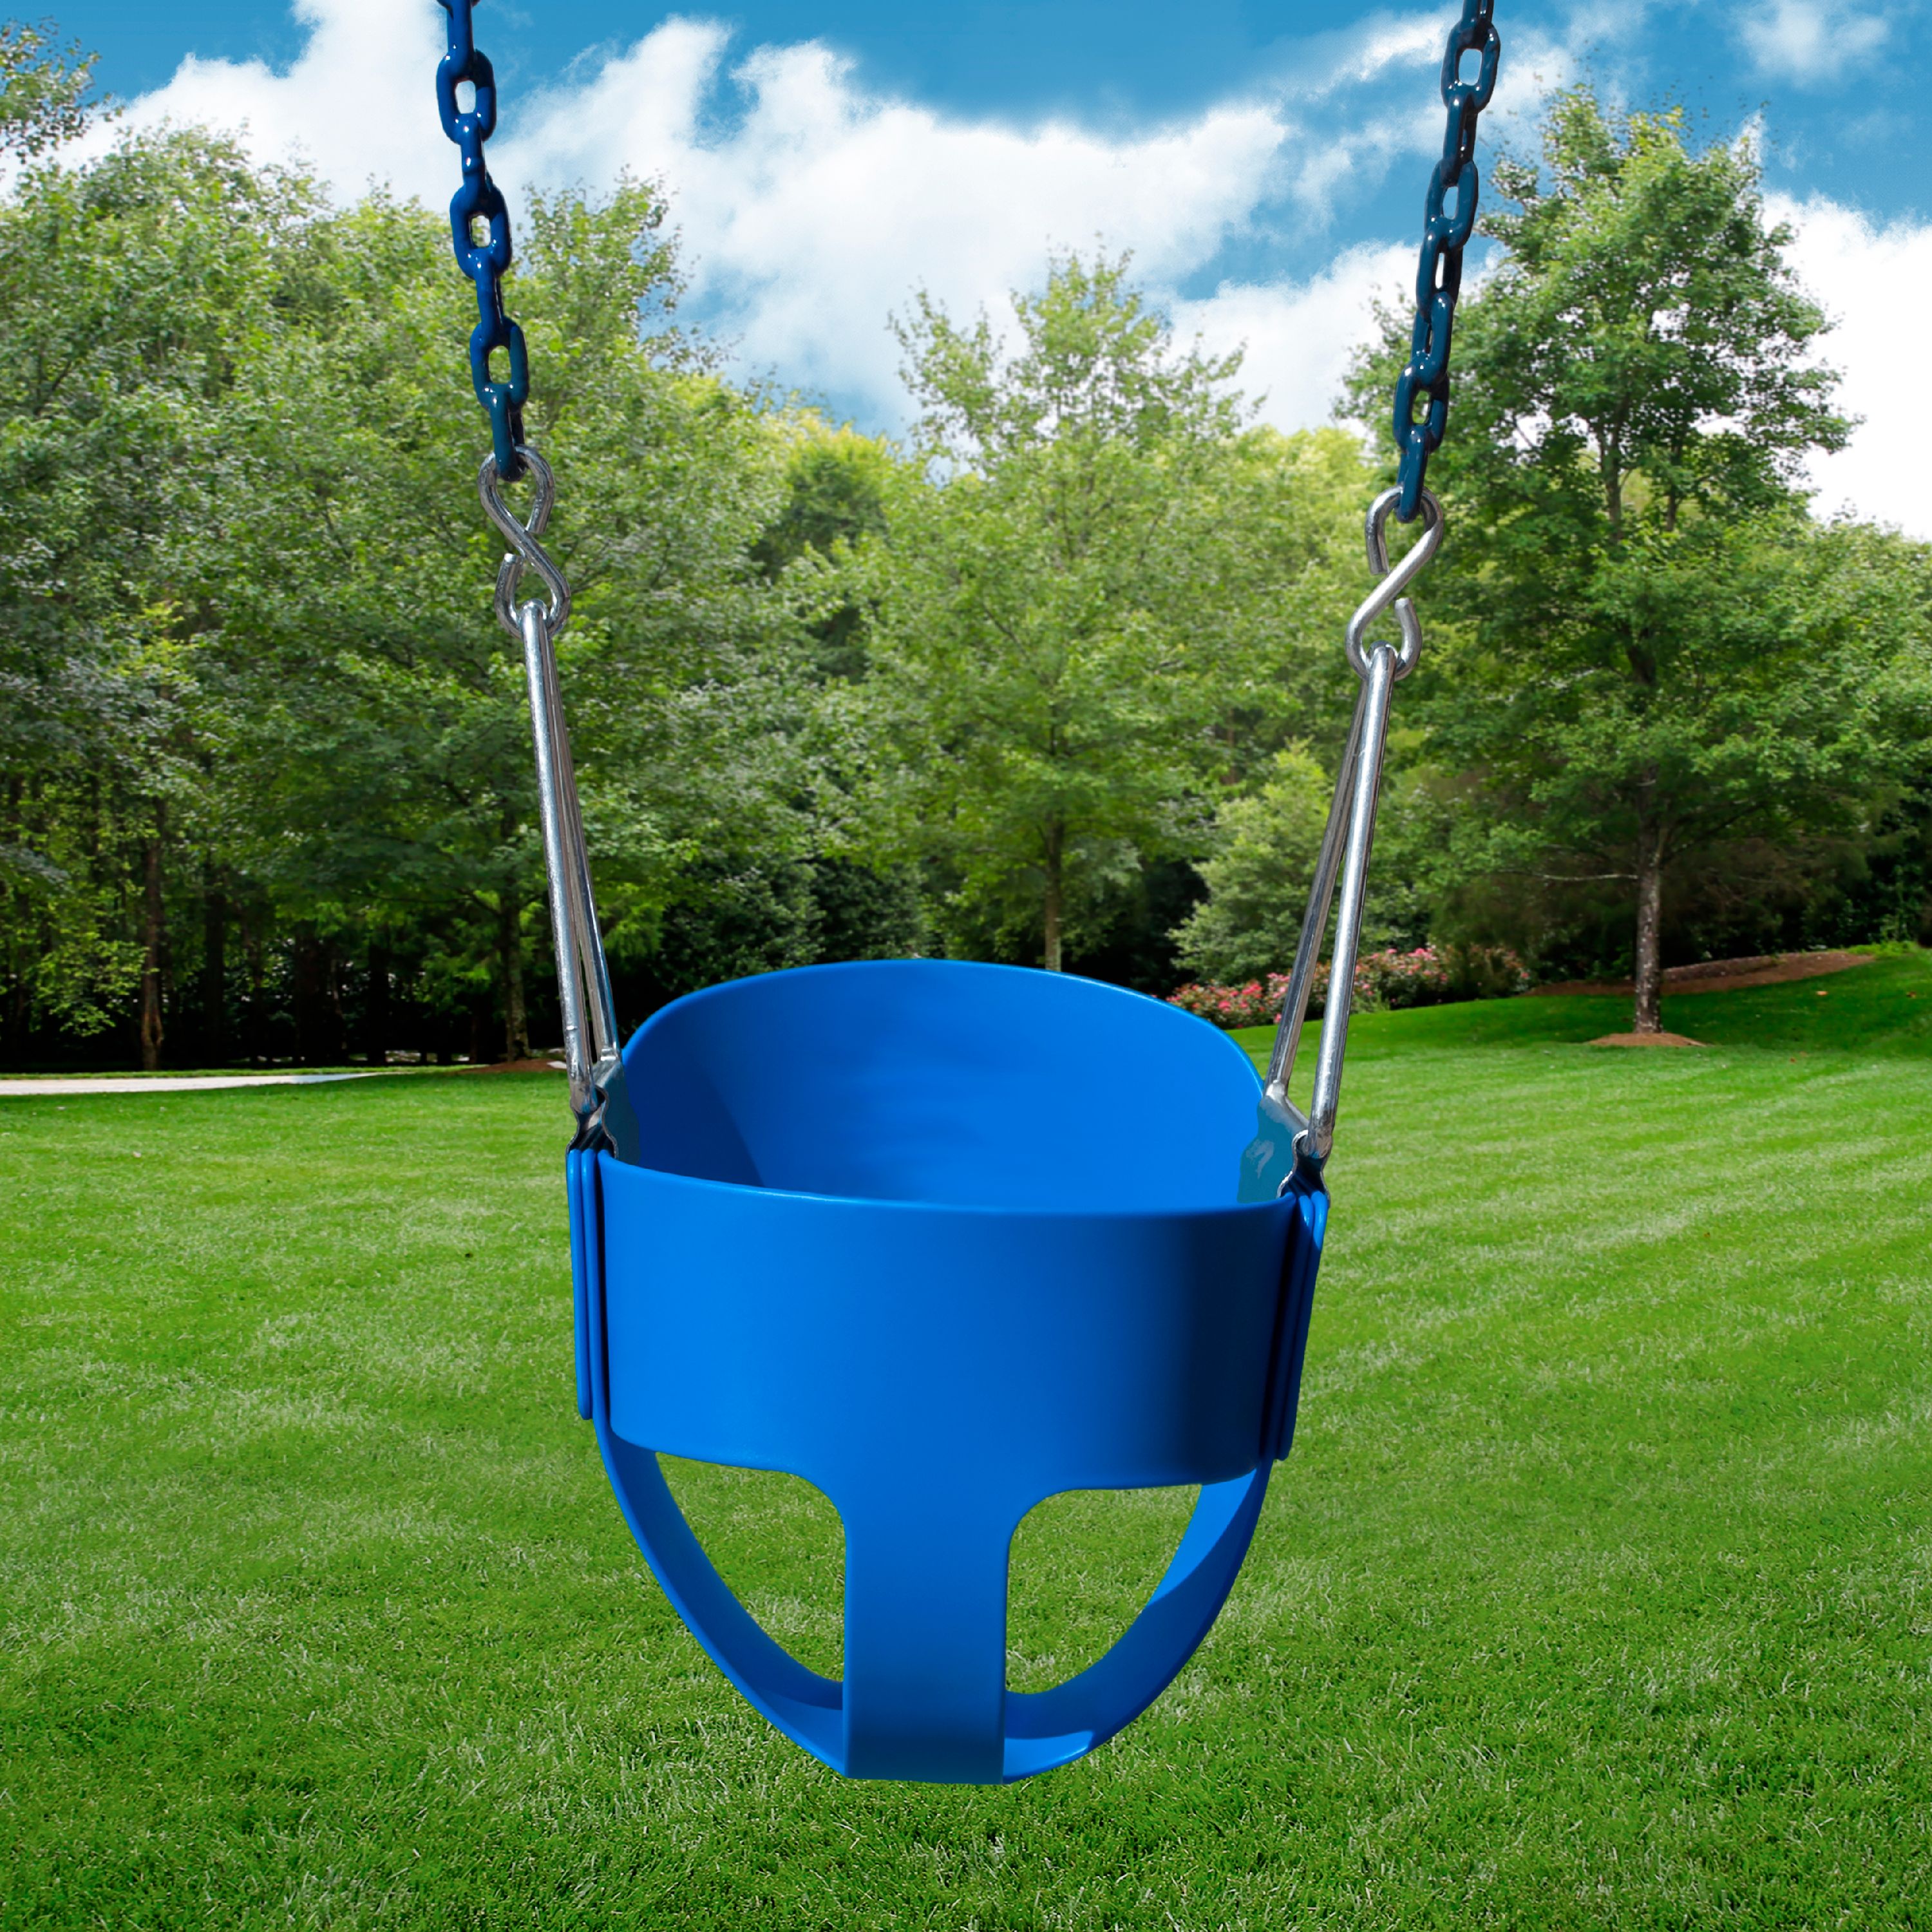 Gorilla Playsets Full Bucket Toddler Swing with Coated Chains - image 2 of 4